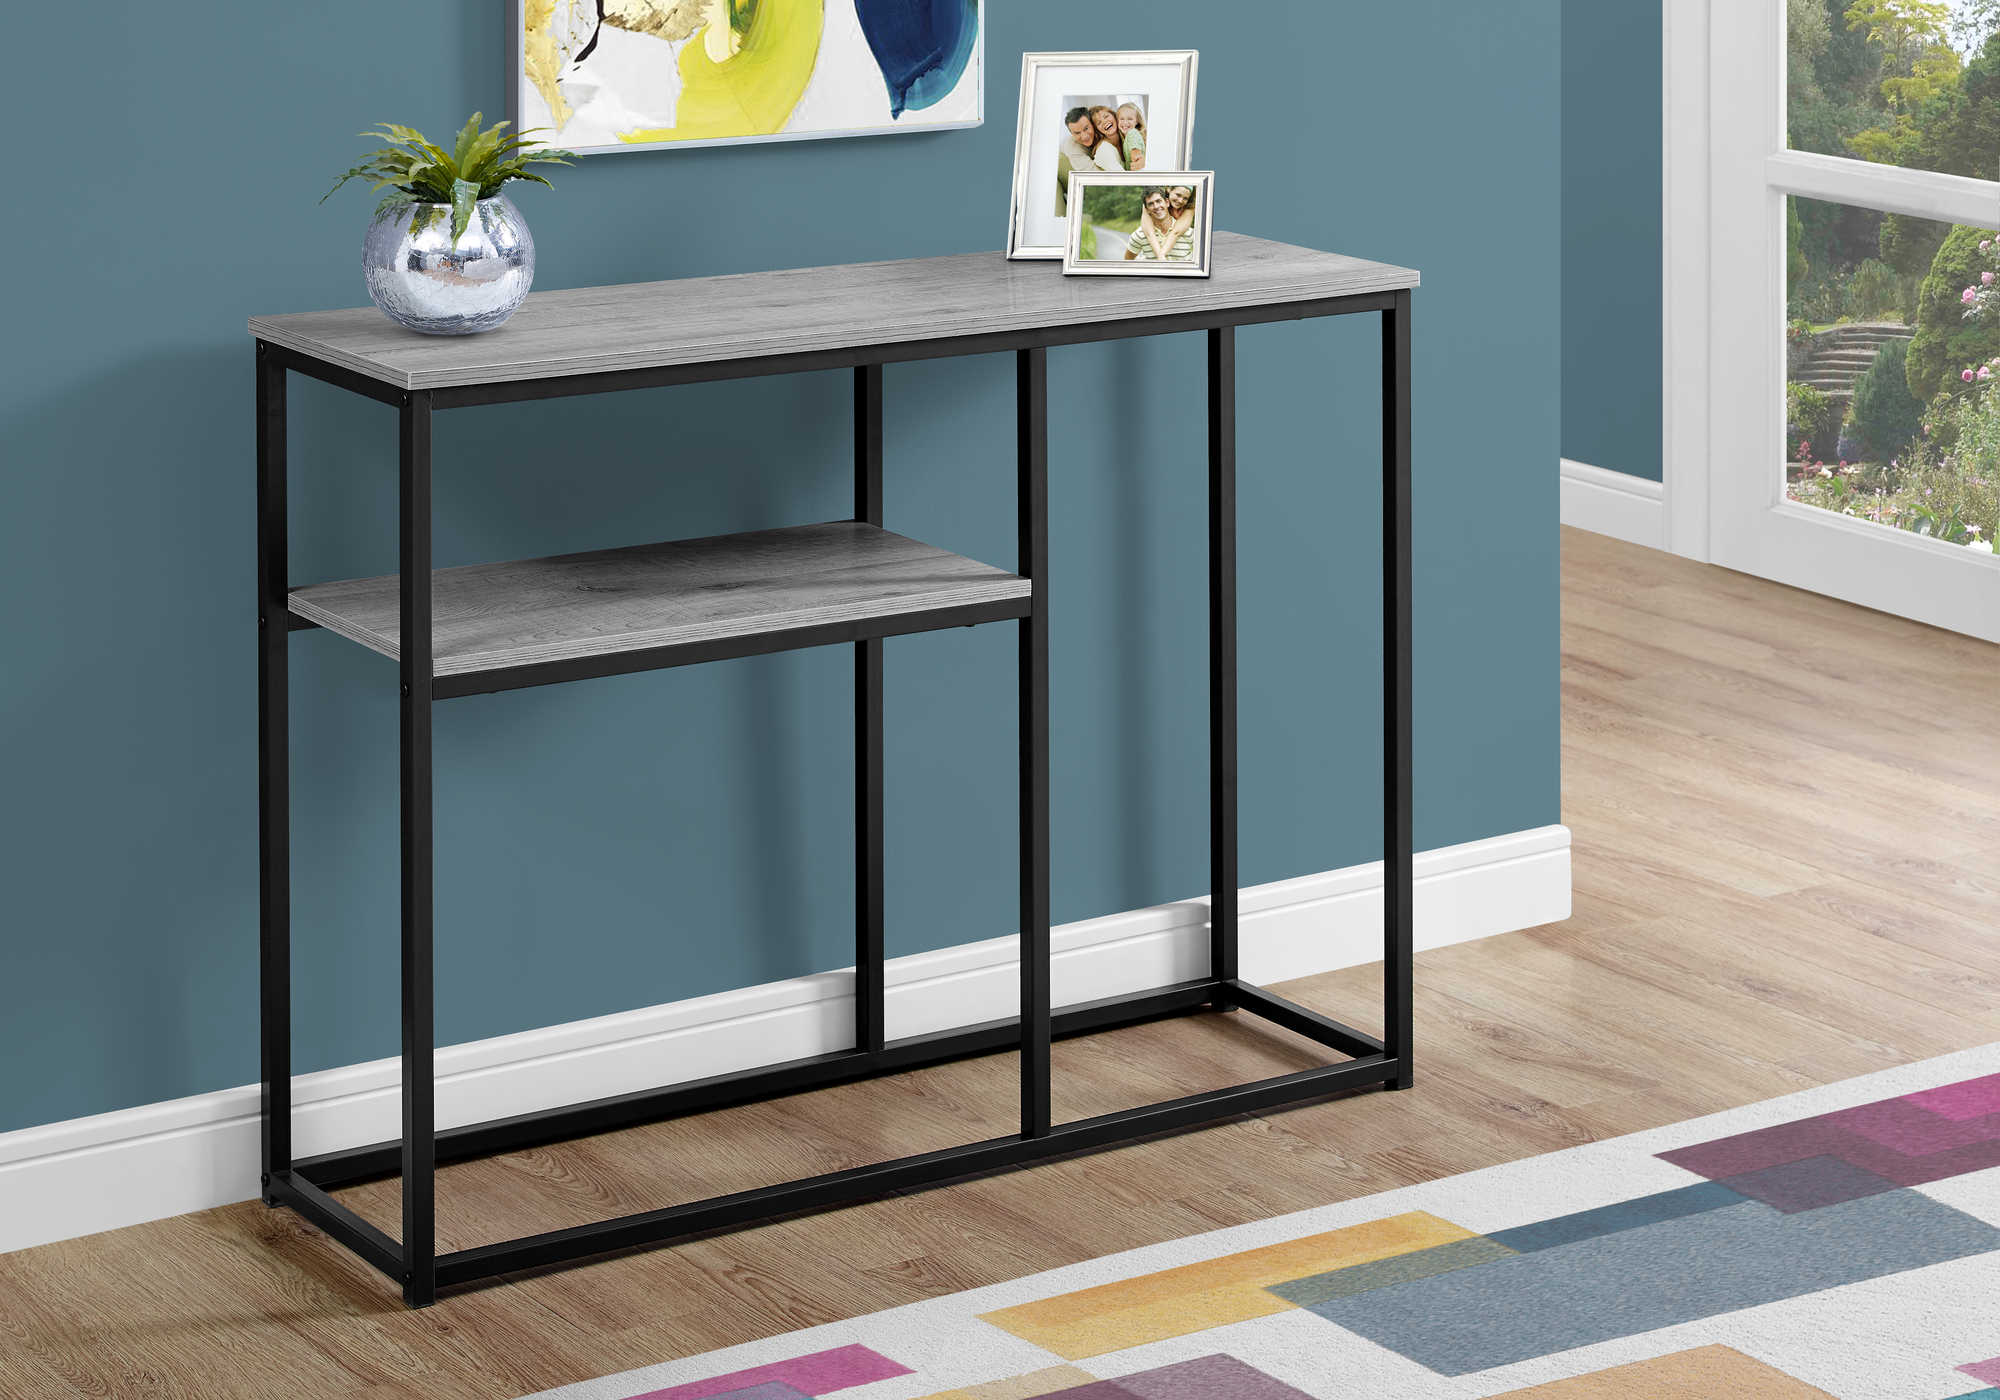 ACCENT TABLE - 42"L / GREY / BLACK METAL HALL CONSOLE